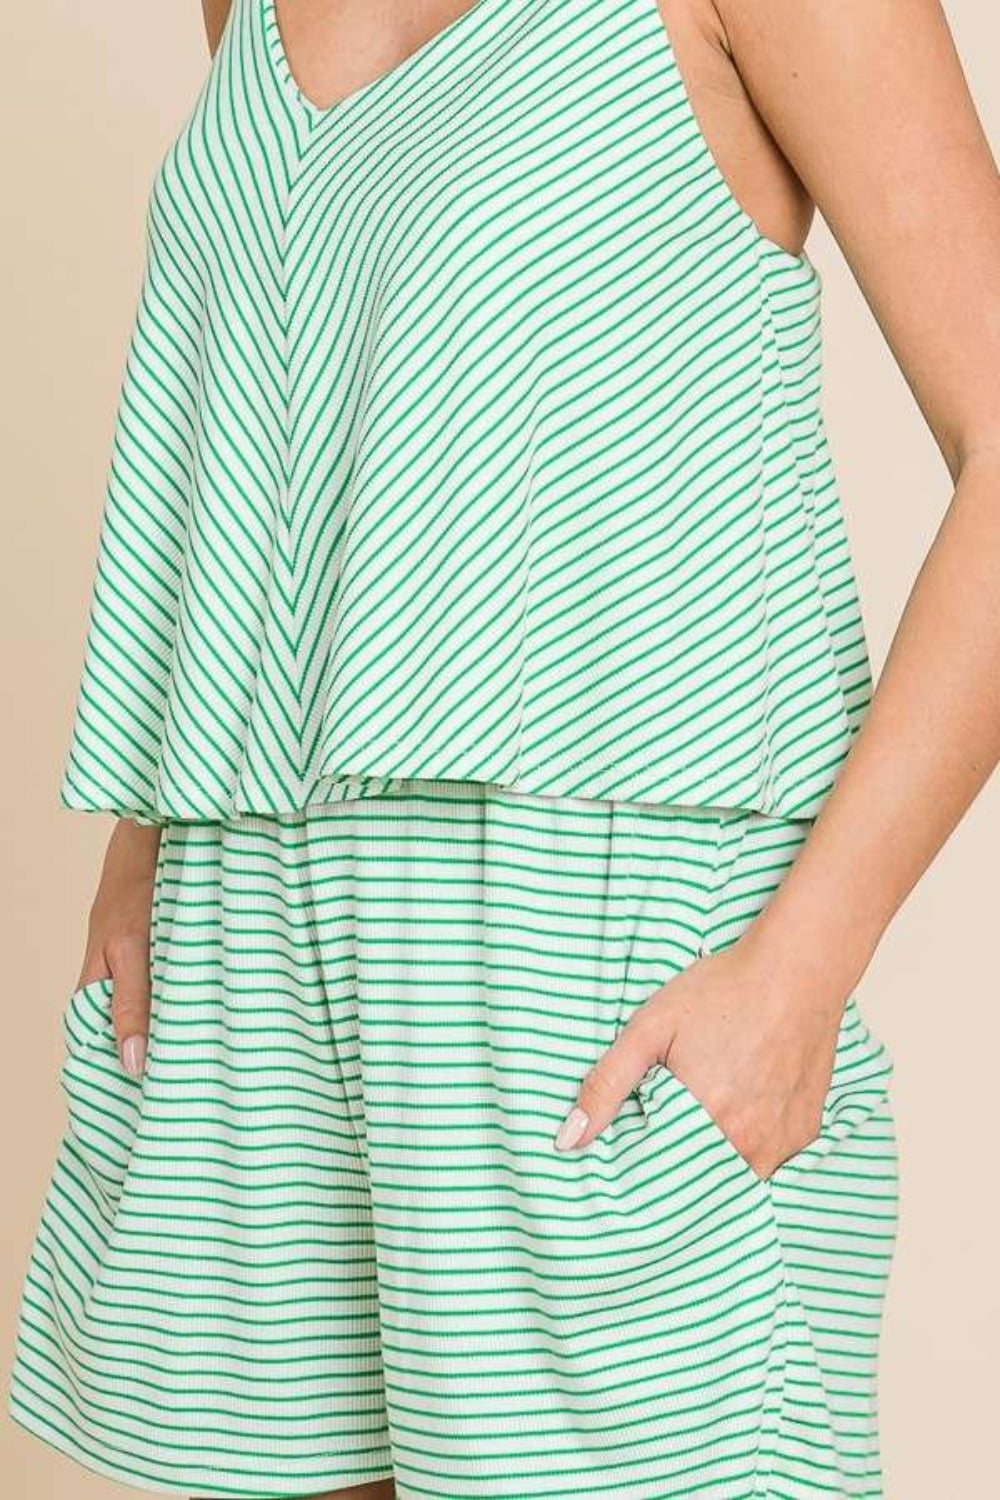 Marley Double Flare Striped Romper